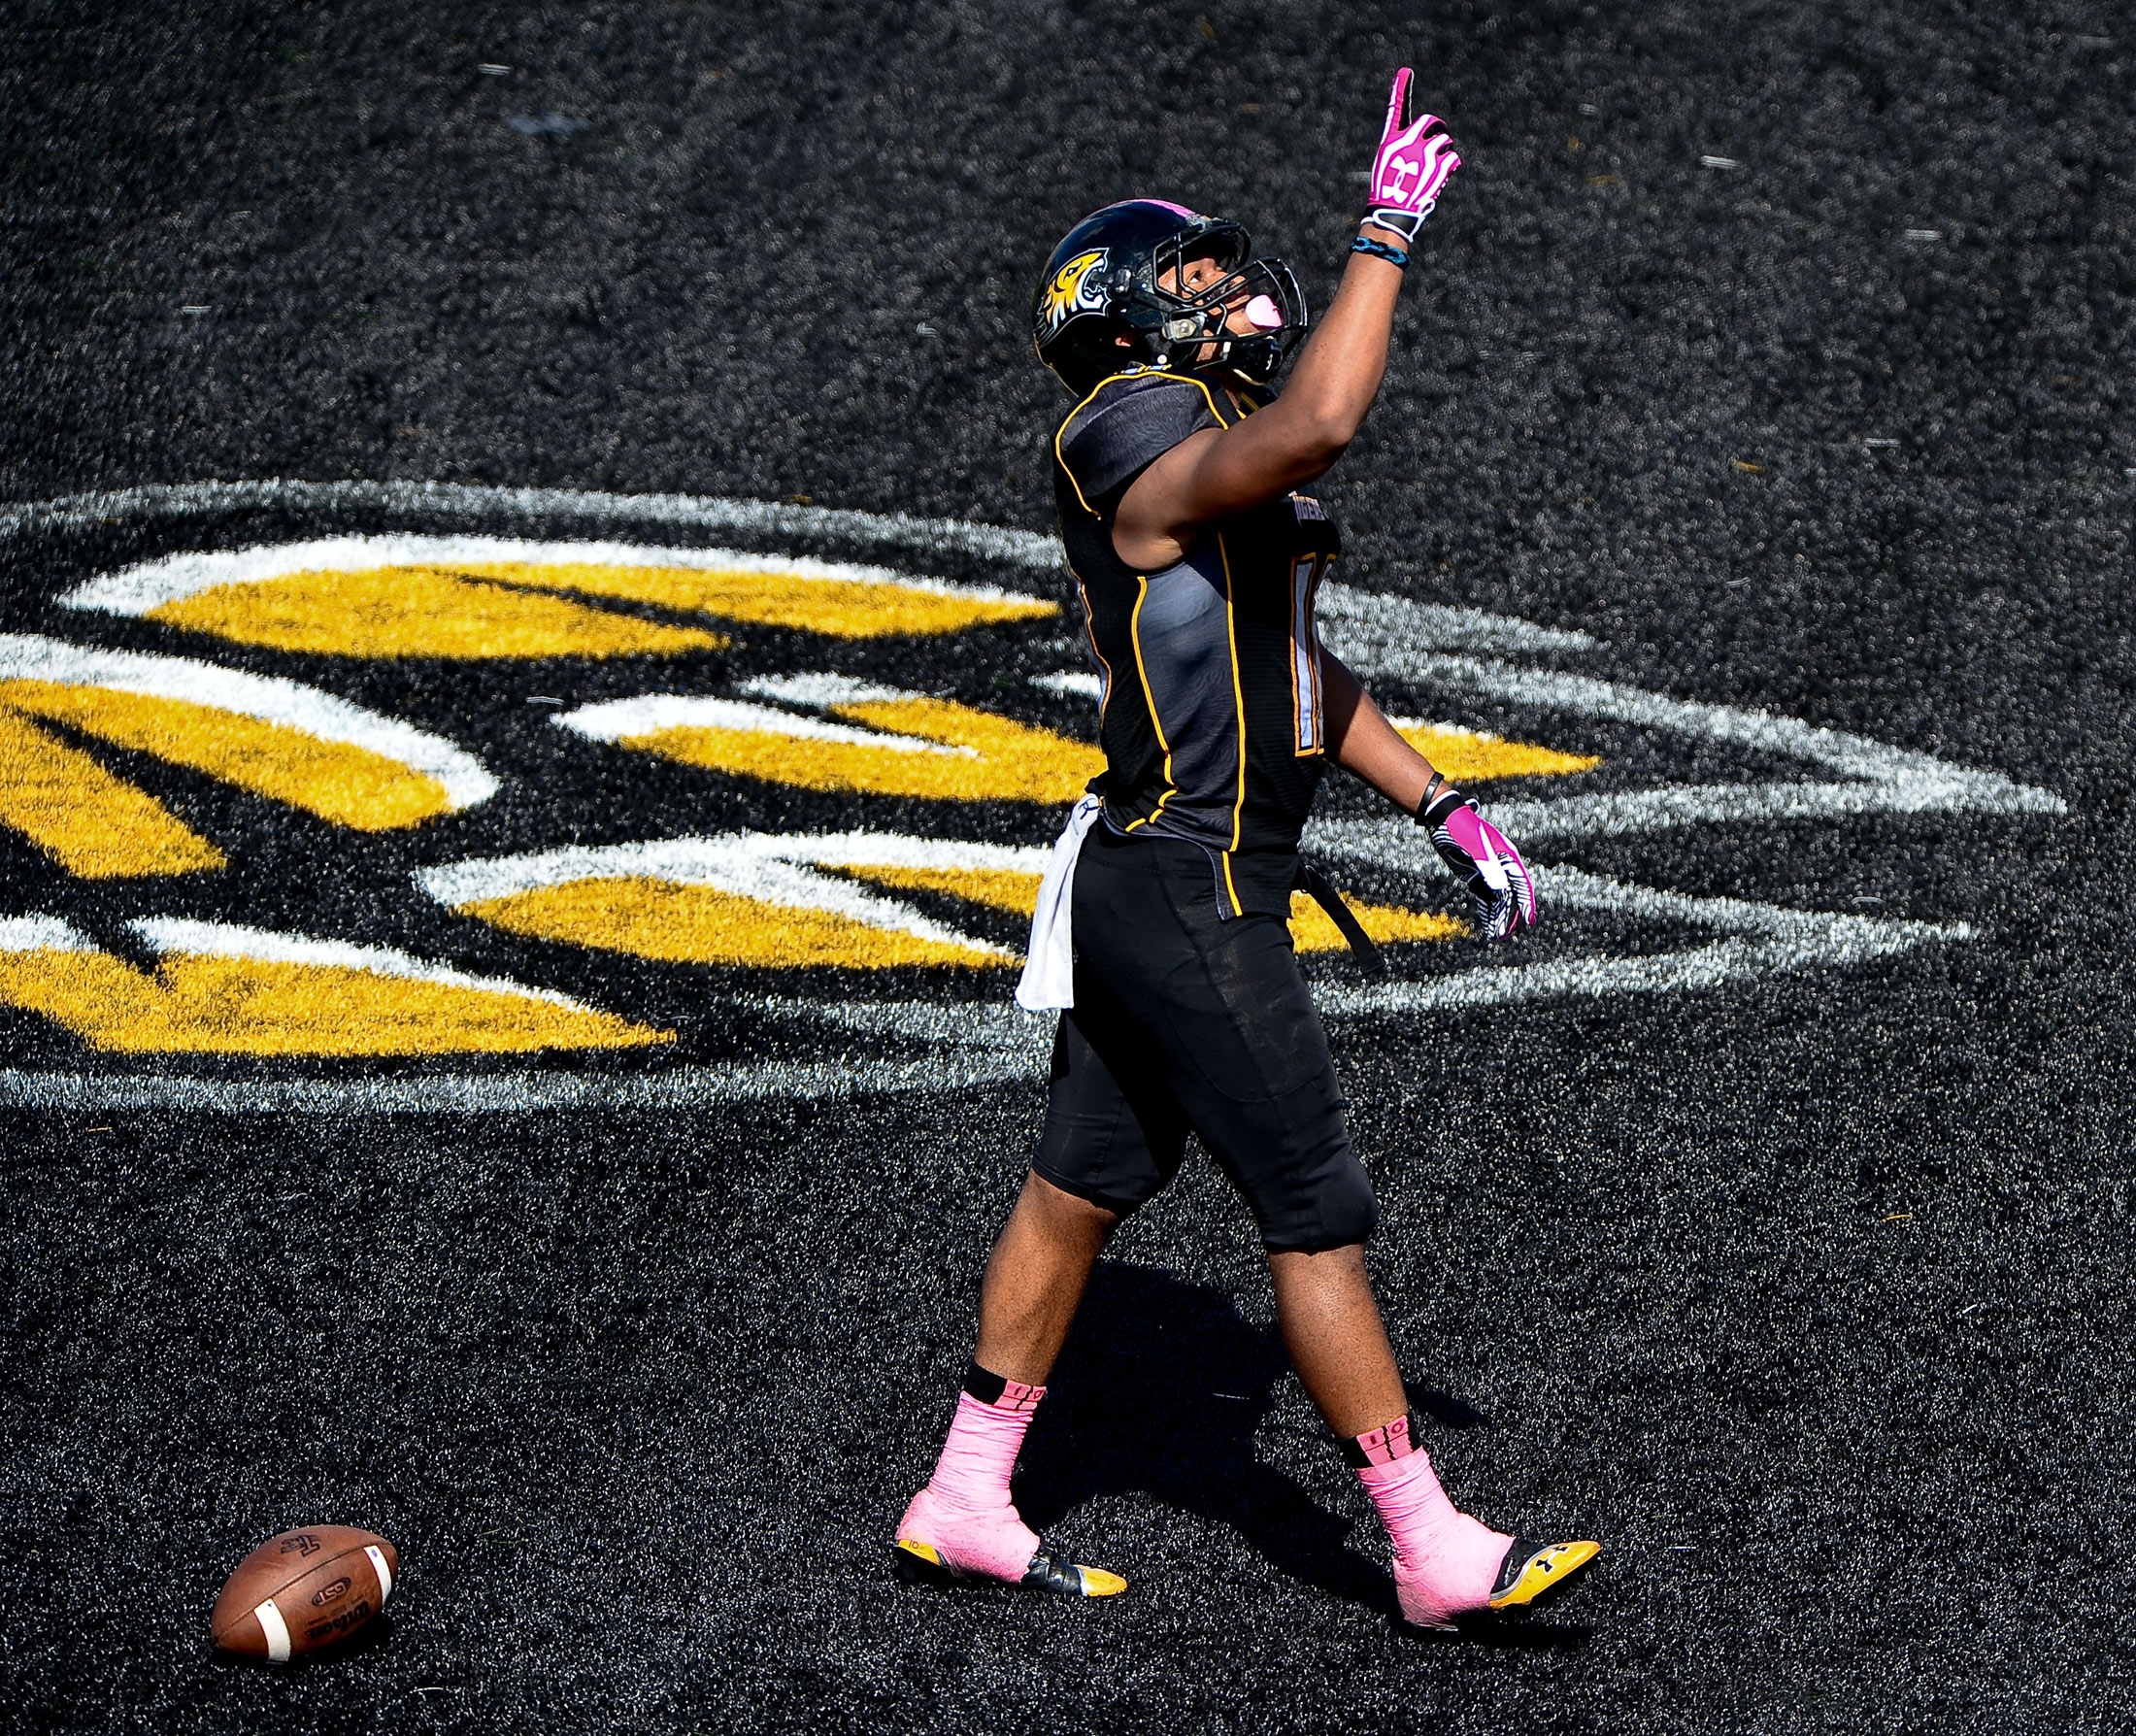  Towson University wide-receiver Spencer Wilkens catches a 21-yard 
touchdown pass in their win over University of New Hampshire on Oct. 5, 
2013 in Baltimore, Md. 